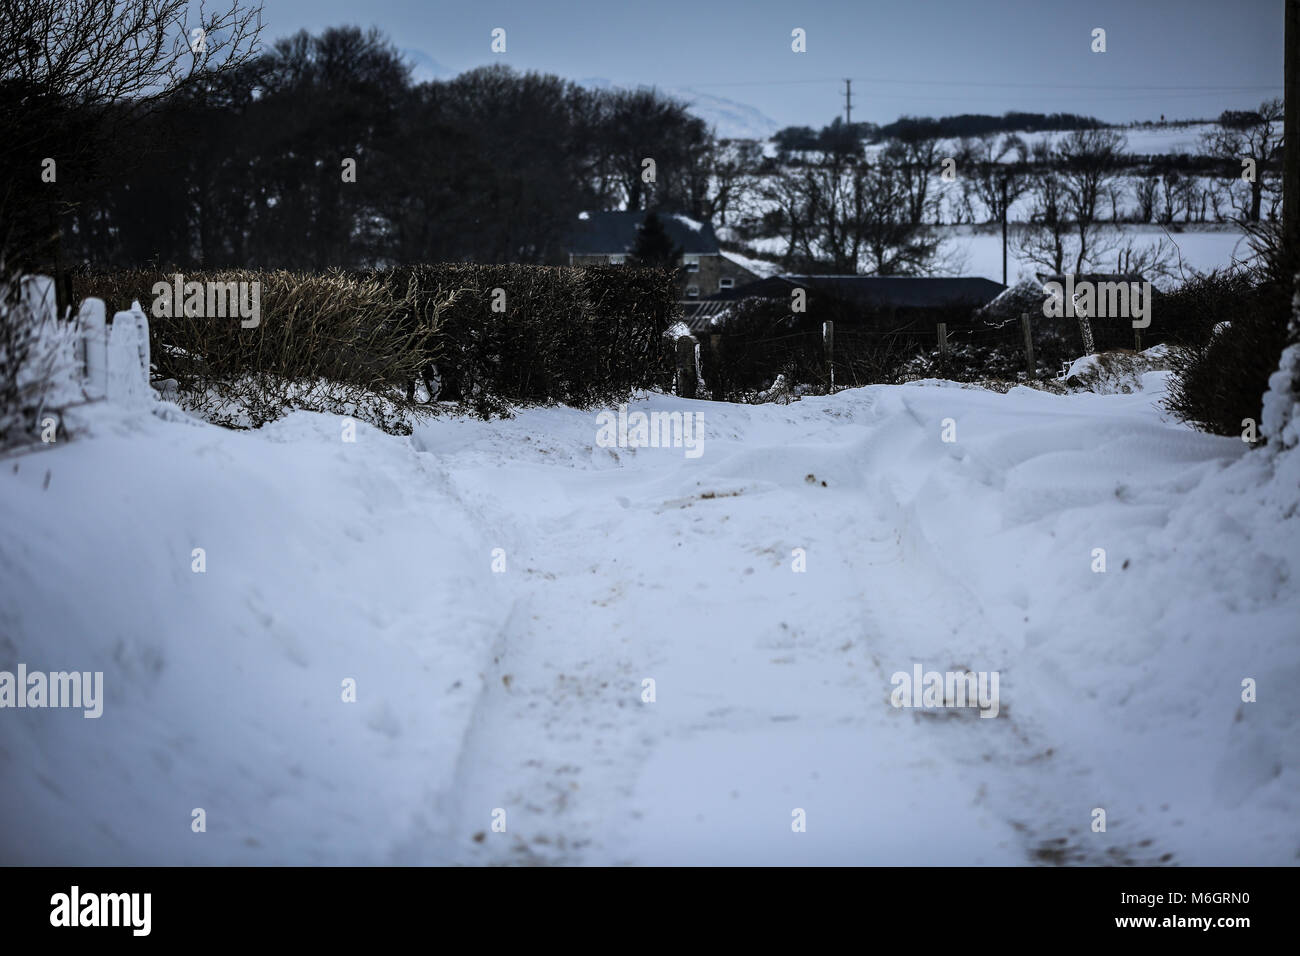 The after effects of Storm Emma is seen in the seaside village of Abersoch, with heavy snow drifts, wind, snow on the beach and a frozen harbour. Stock Photo